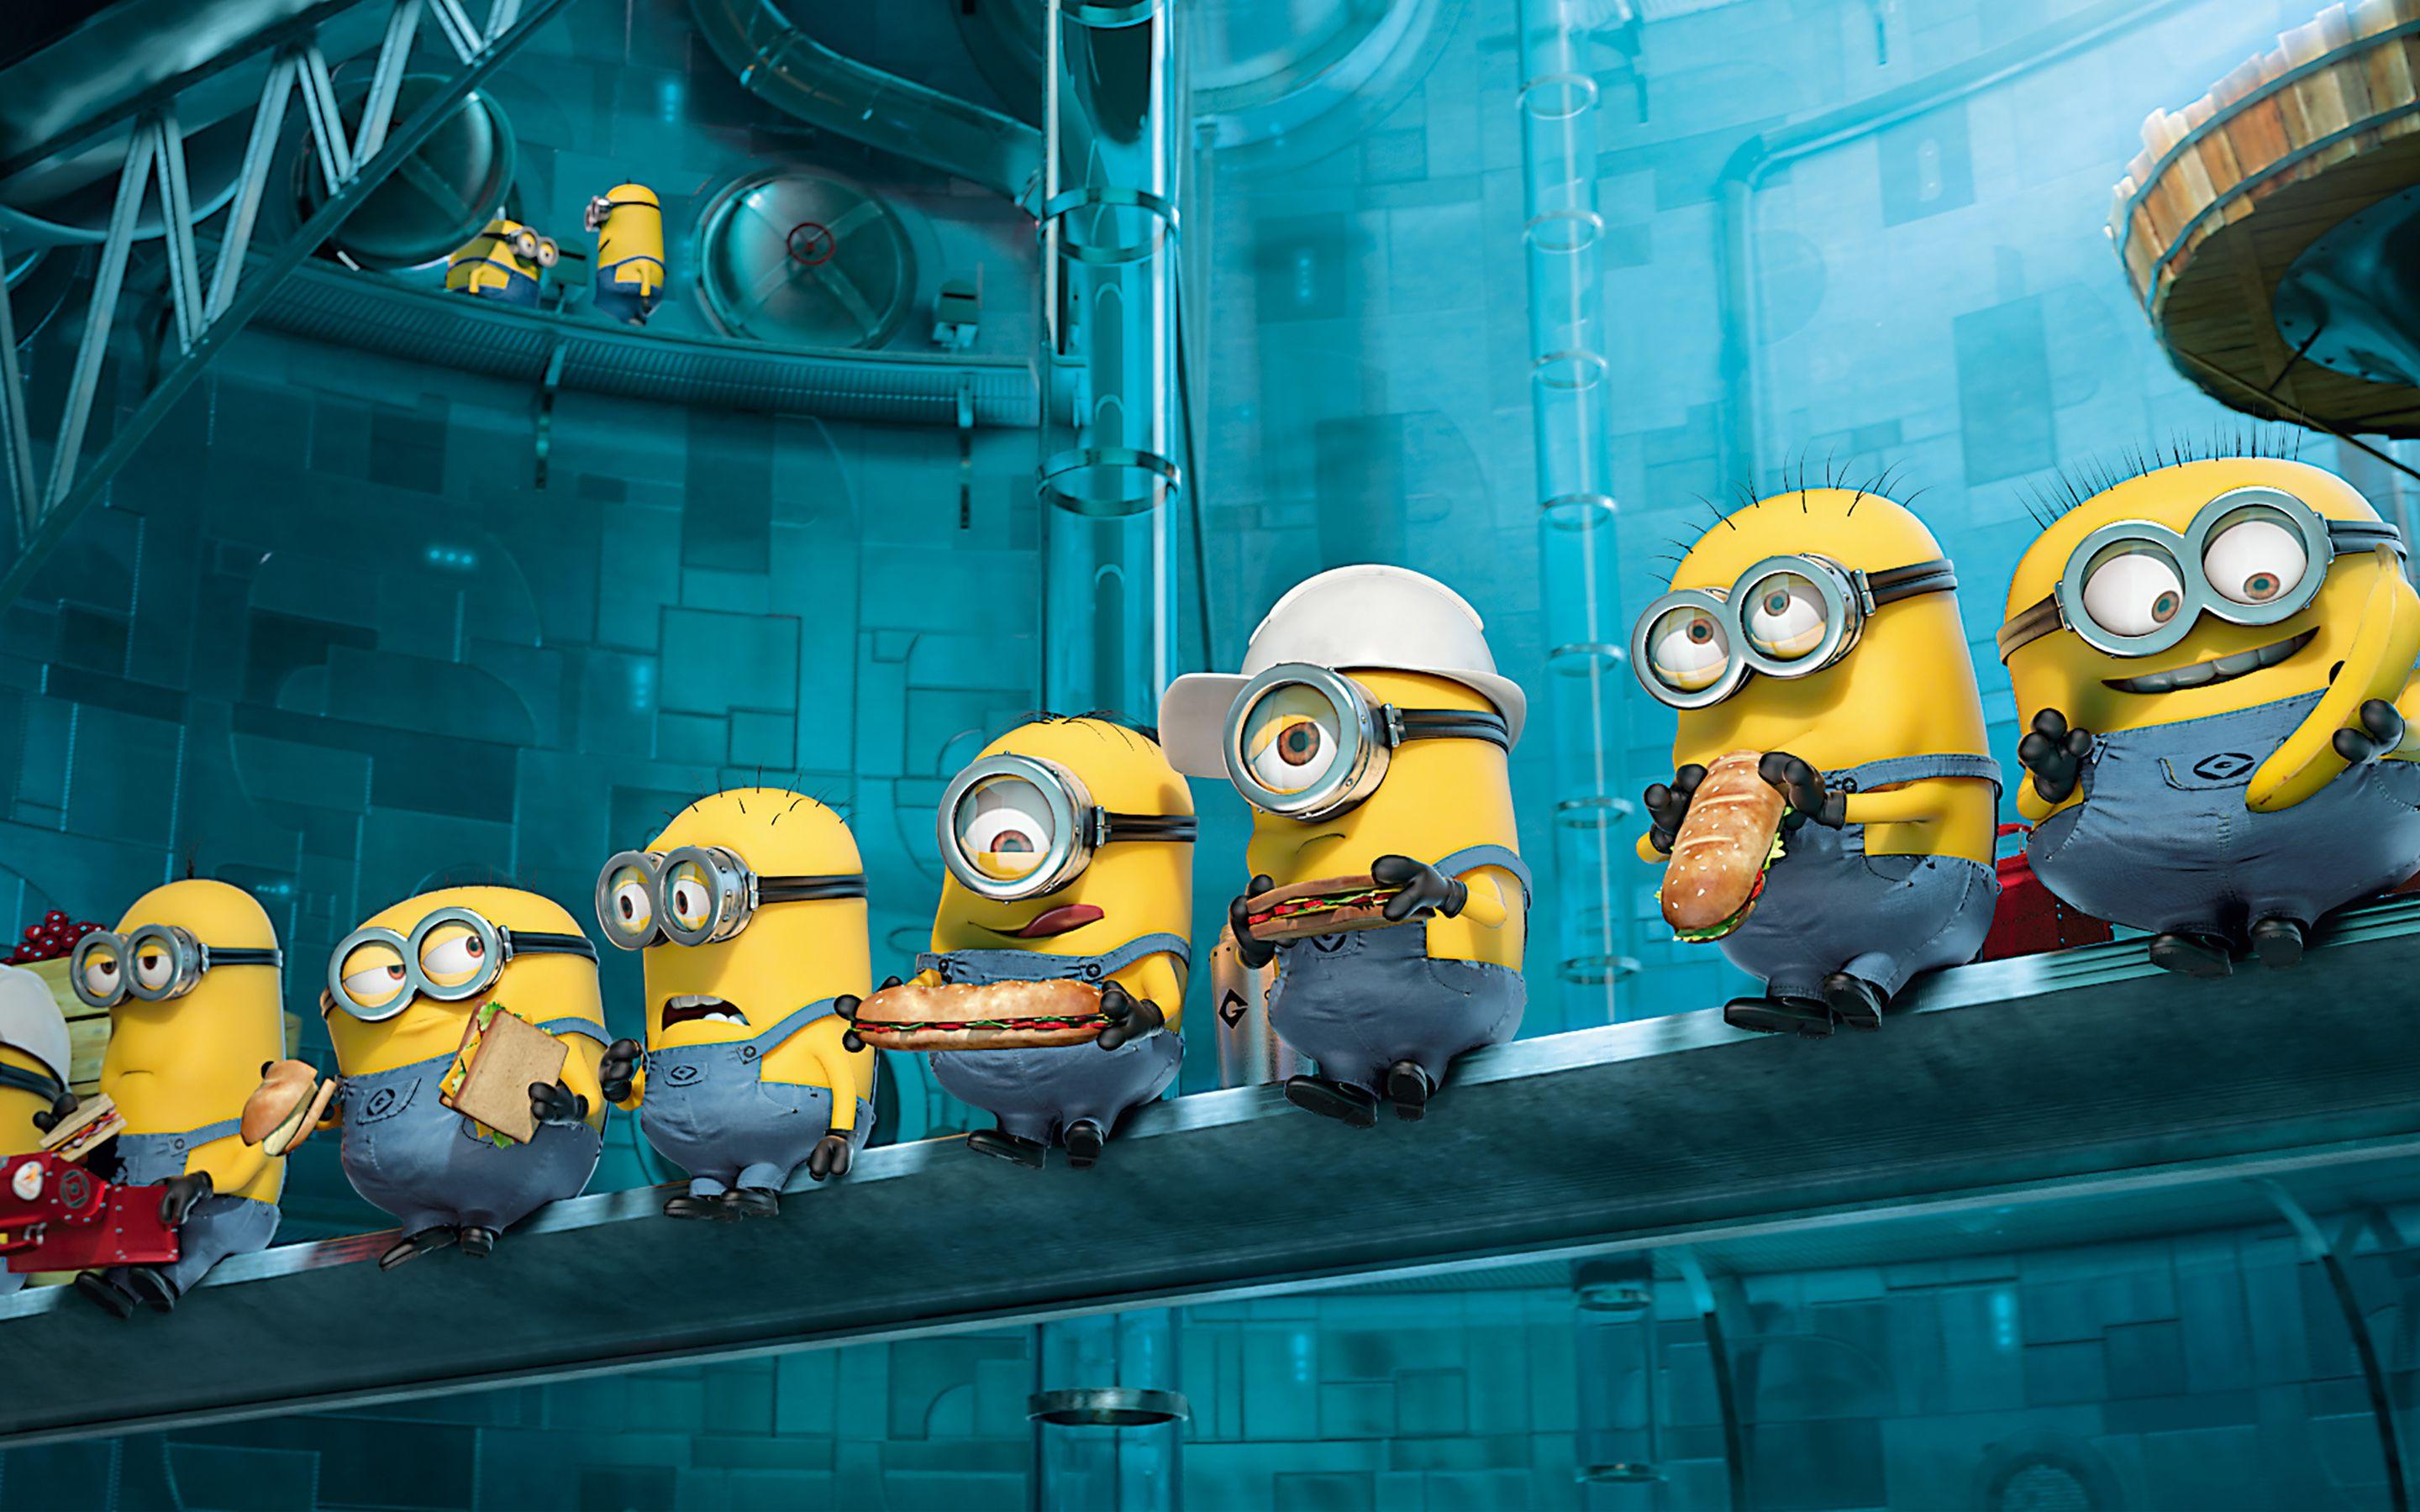 Wallpapers Minions - Wallpaper Cave